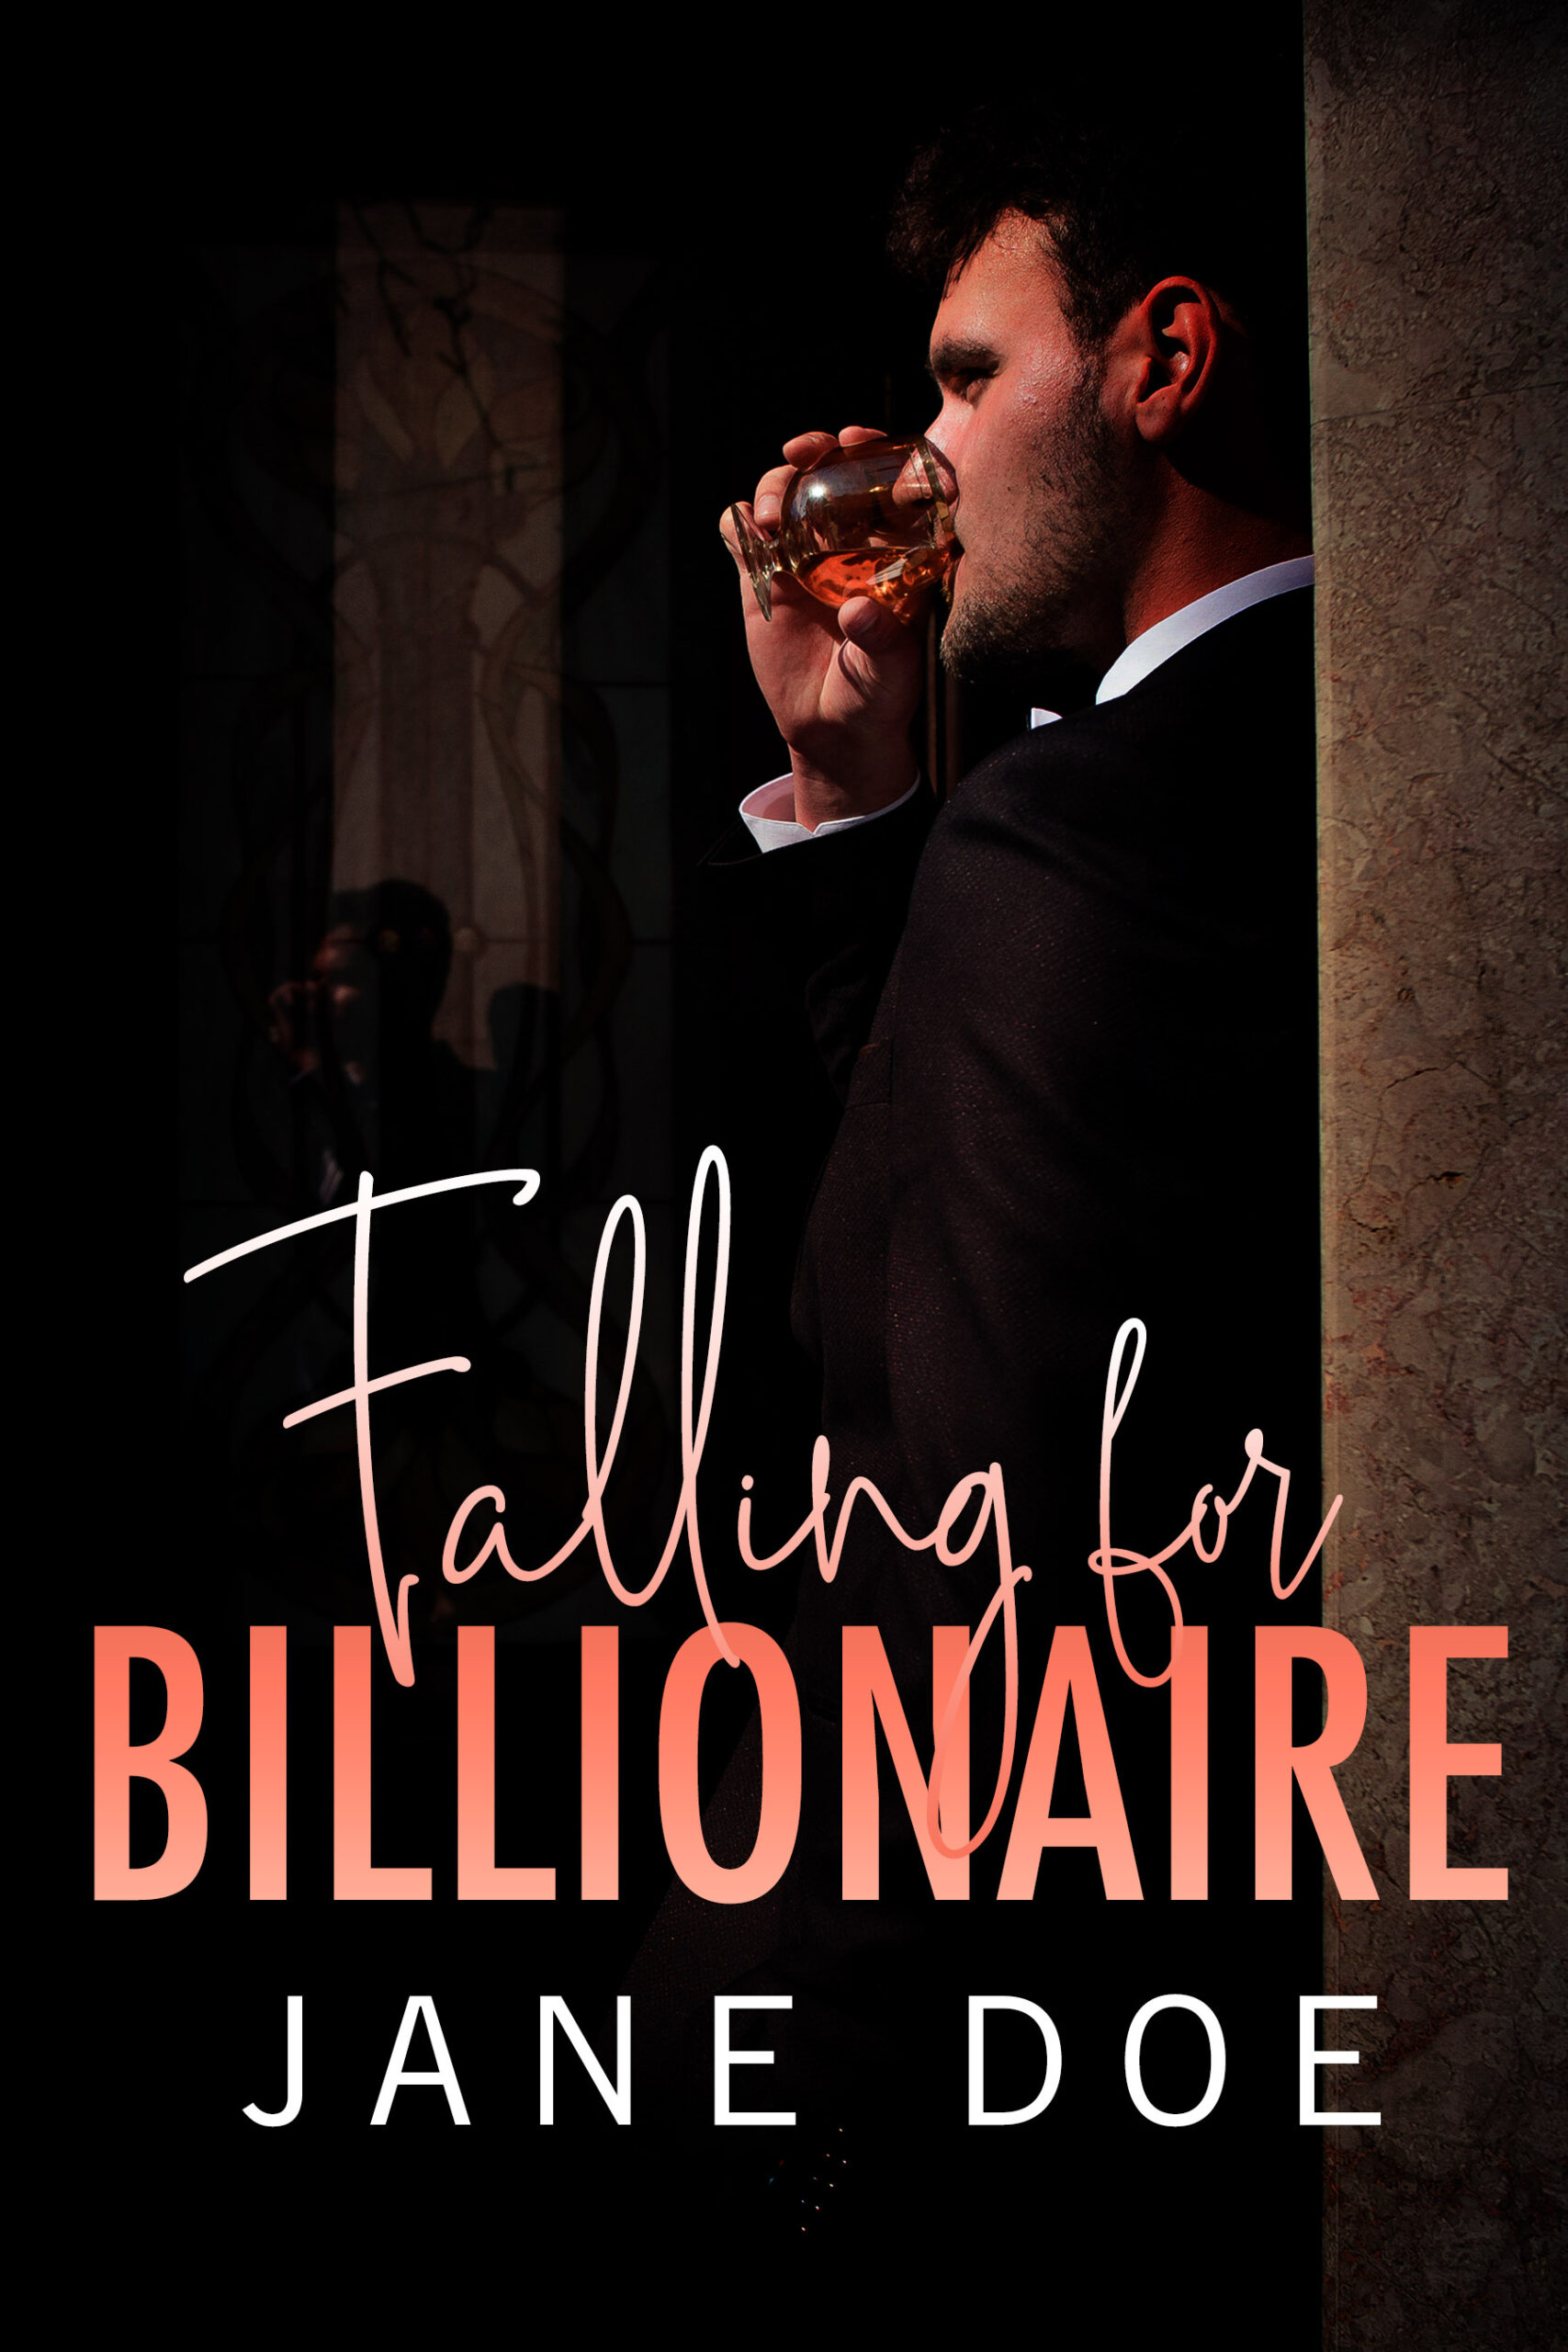 Falling for a Billionaire